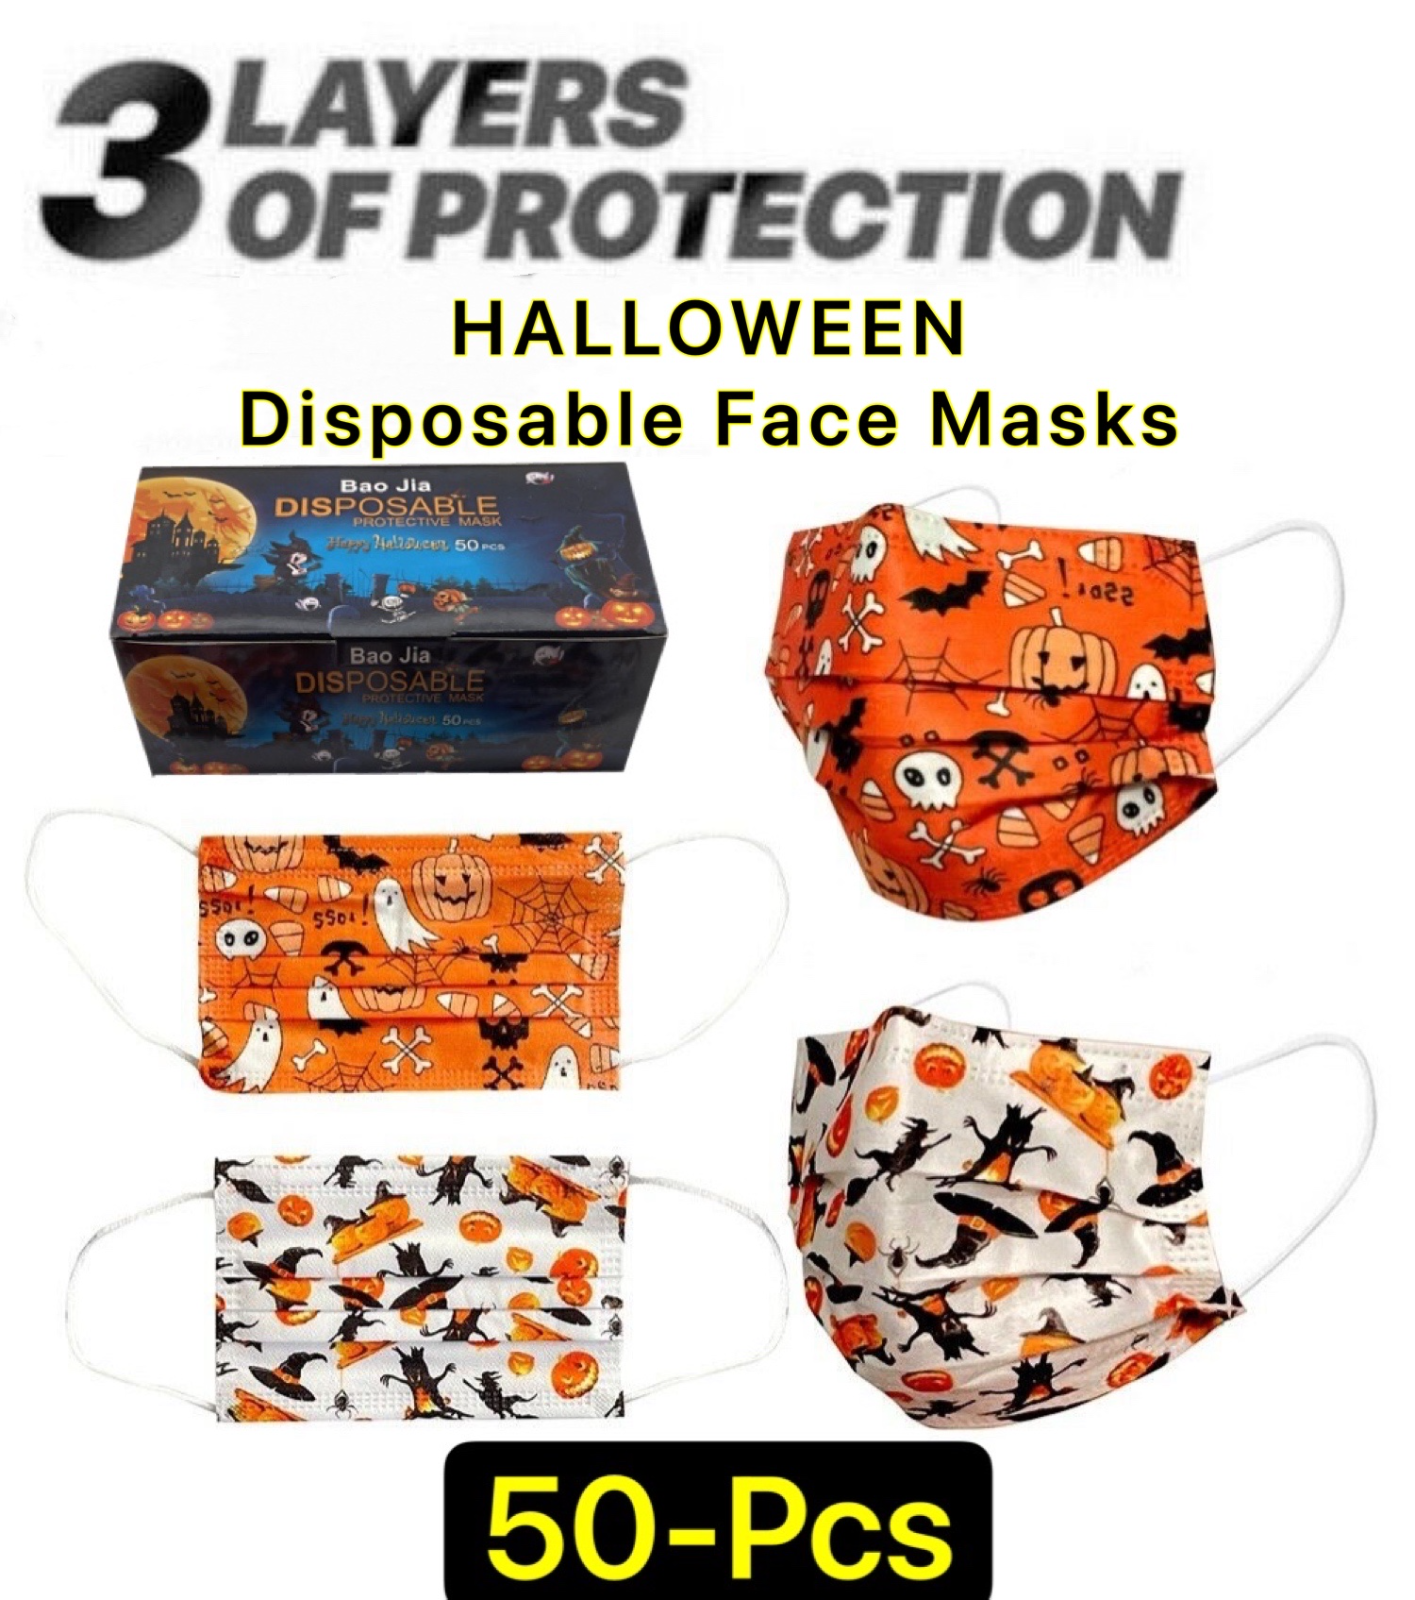 Holiday Pattern Disposable (50-PCS) Face Mask Assorted 3-Ply Adult Mouth Cover Unbranded Does Not Apply